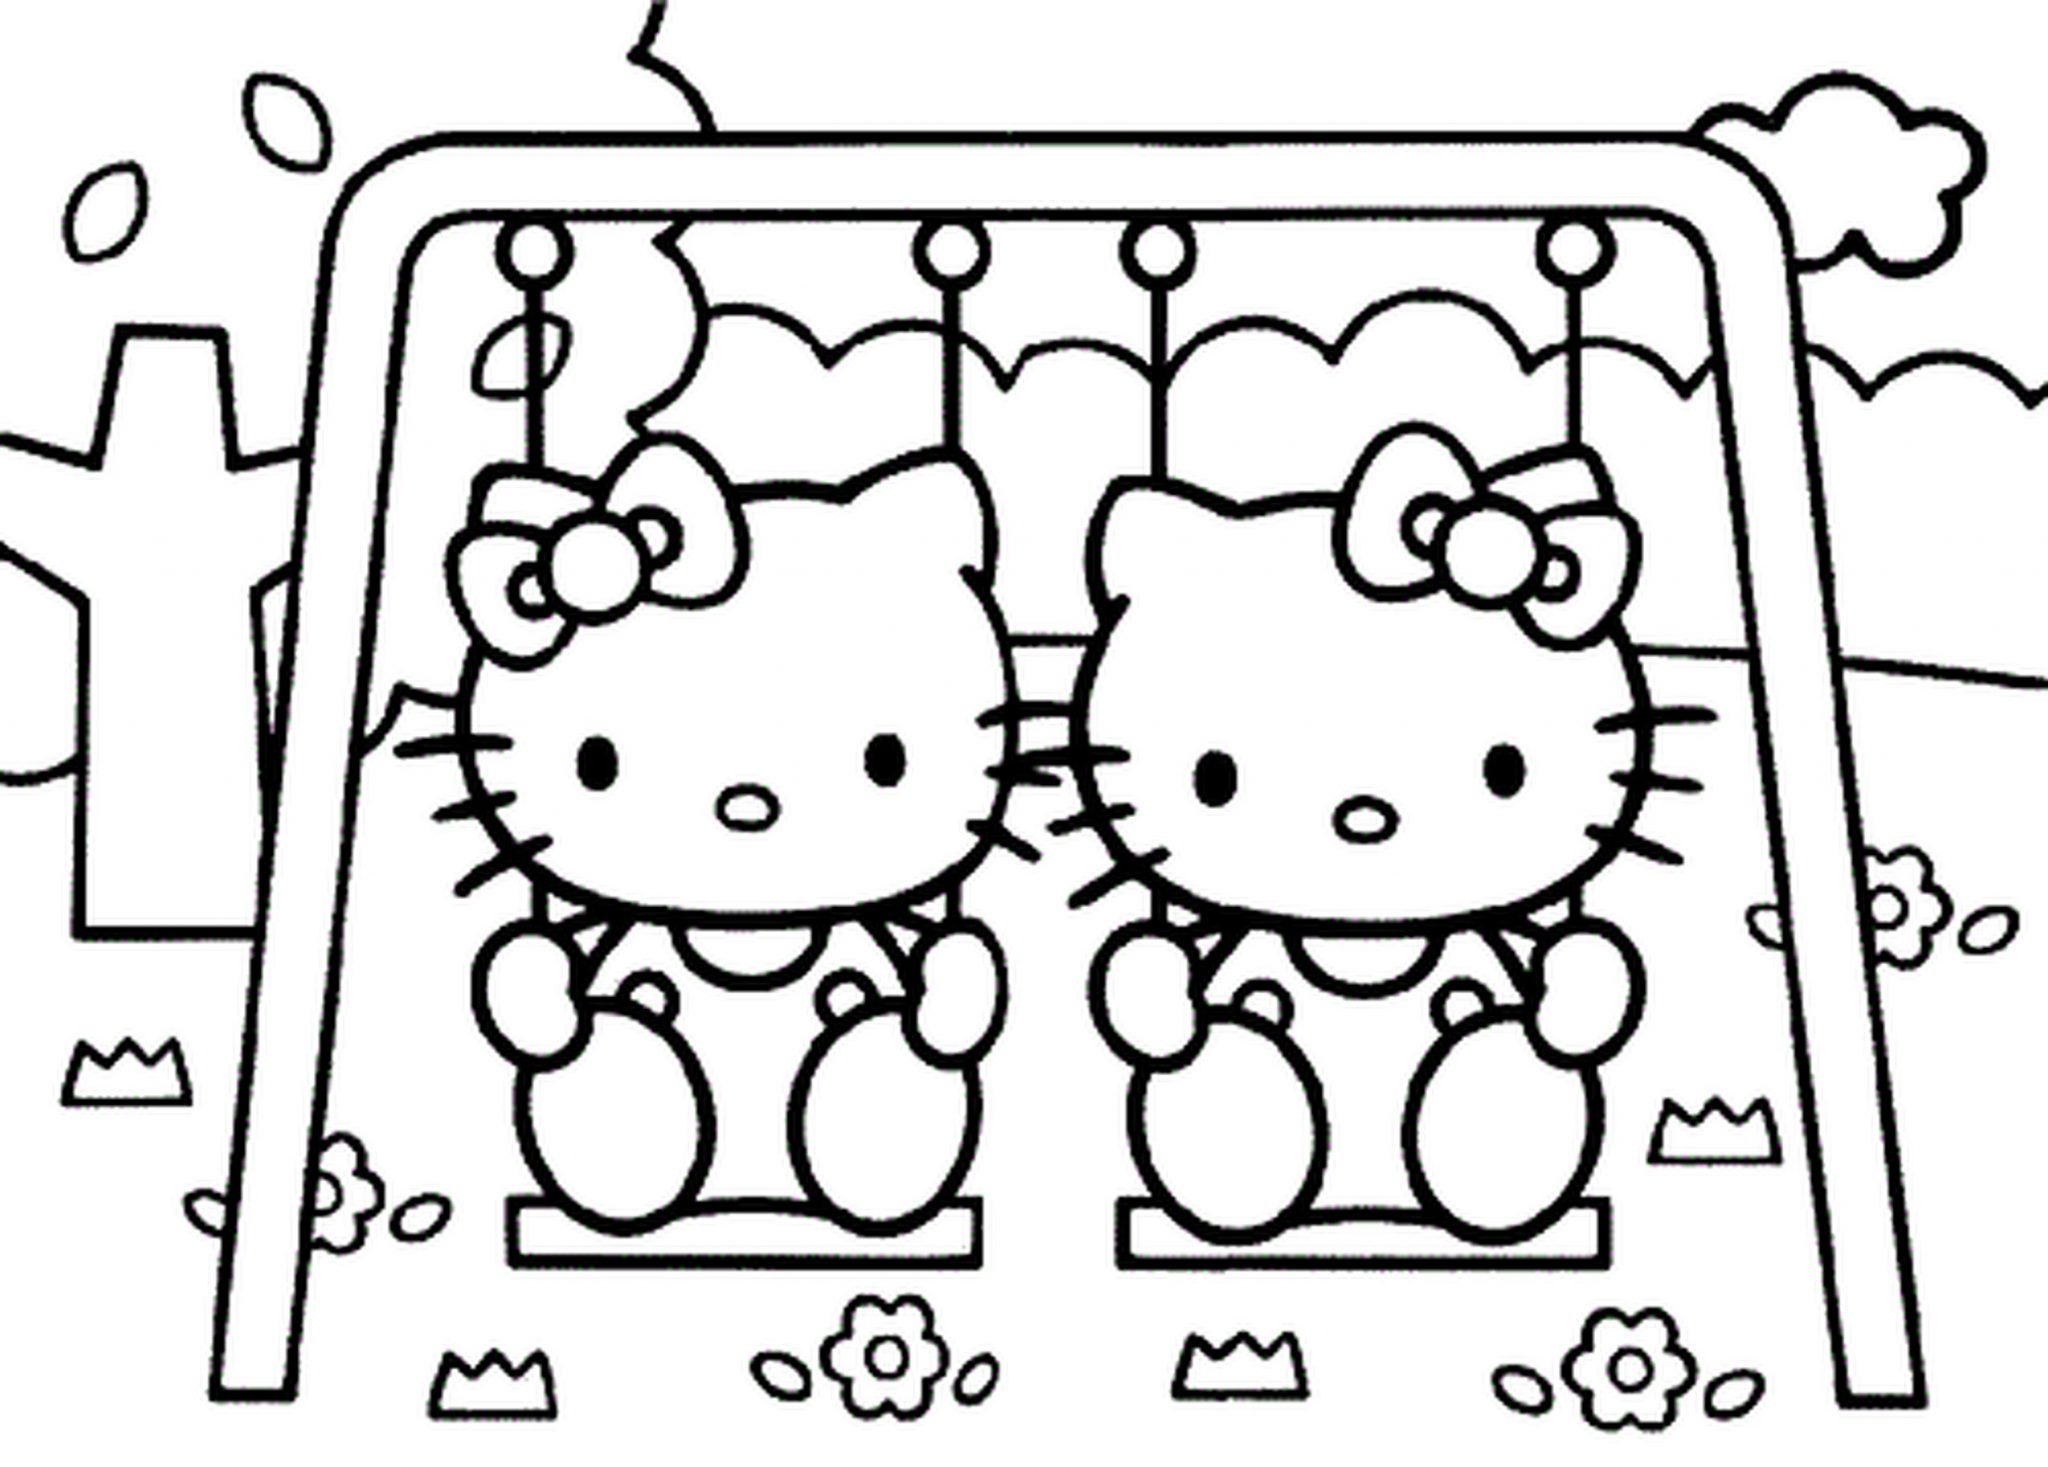 Print & Download   Coloring Pages for Girls, Recommend a Hobby To ...